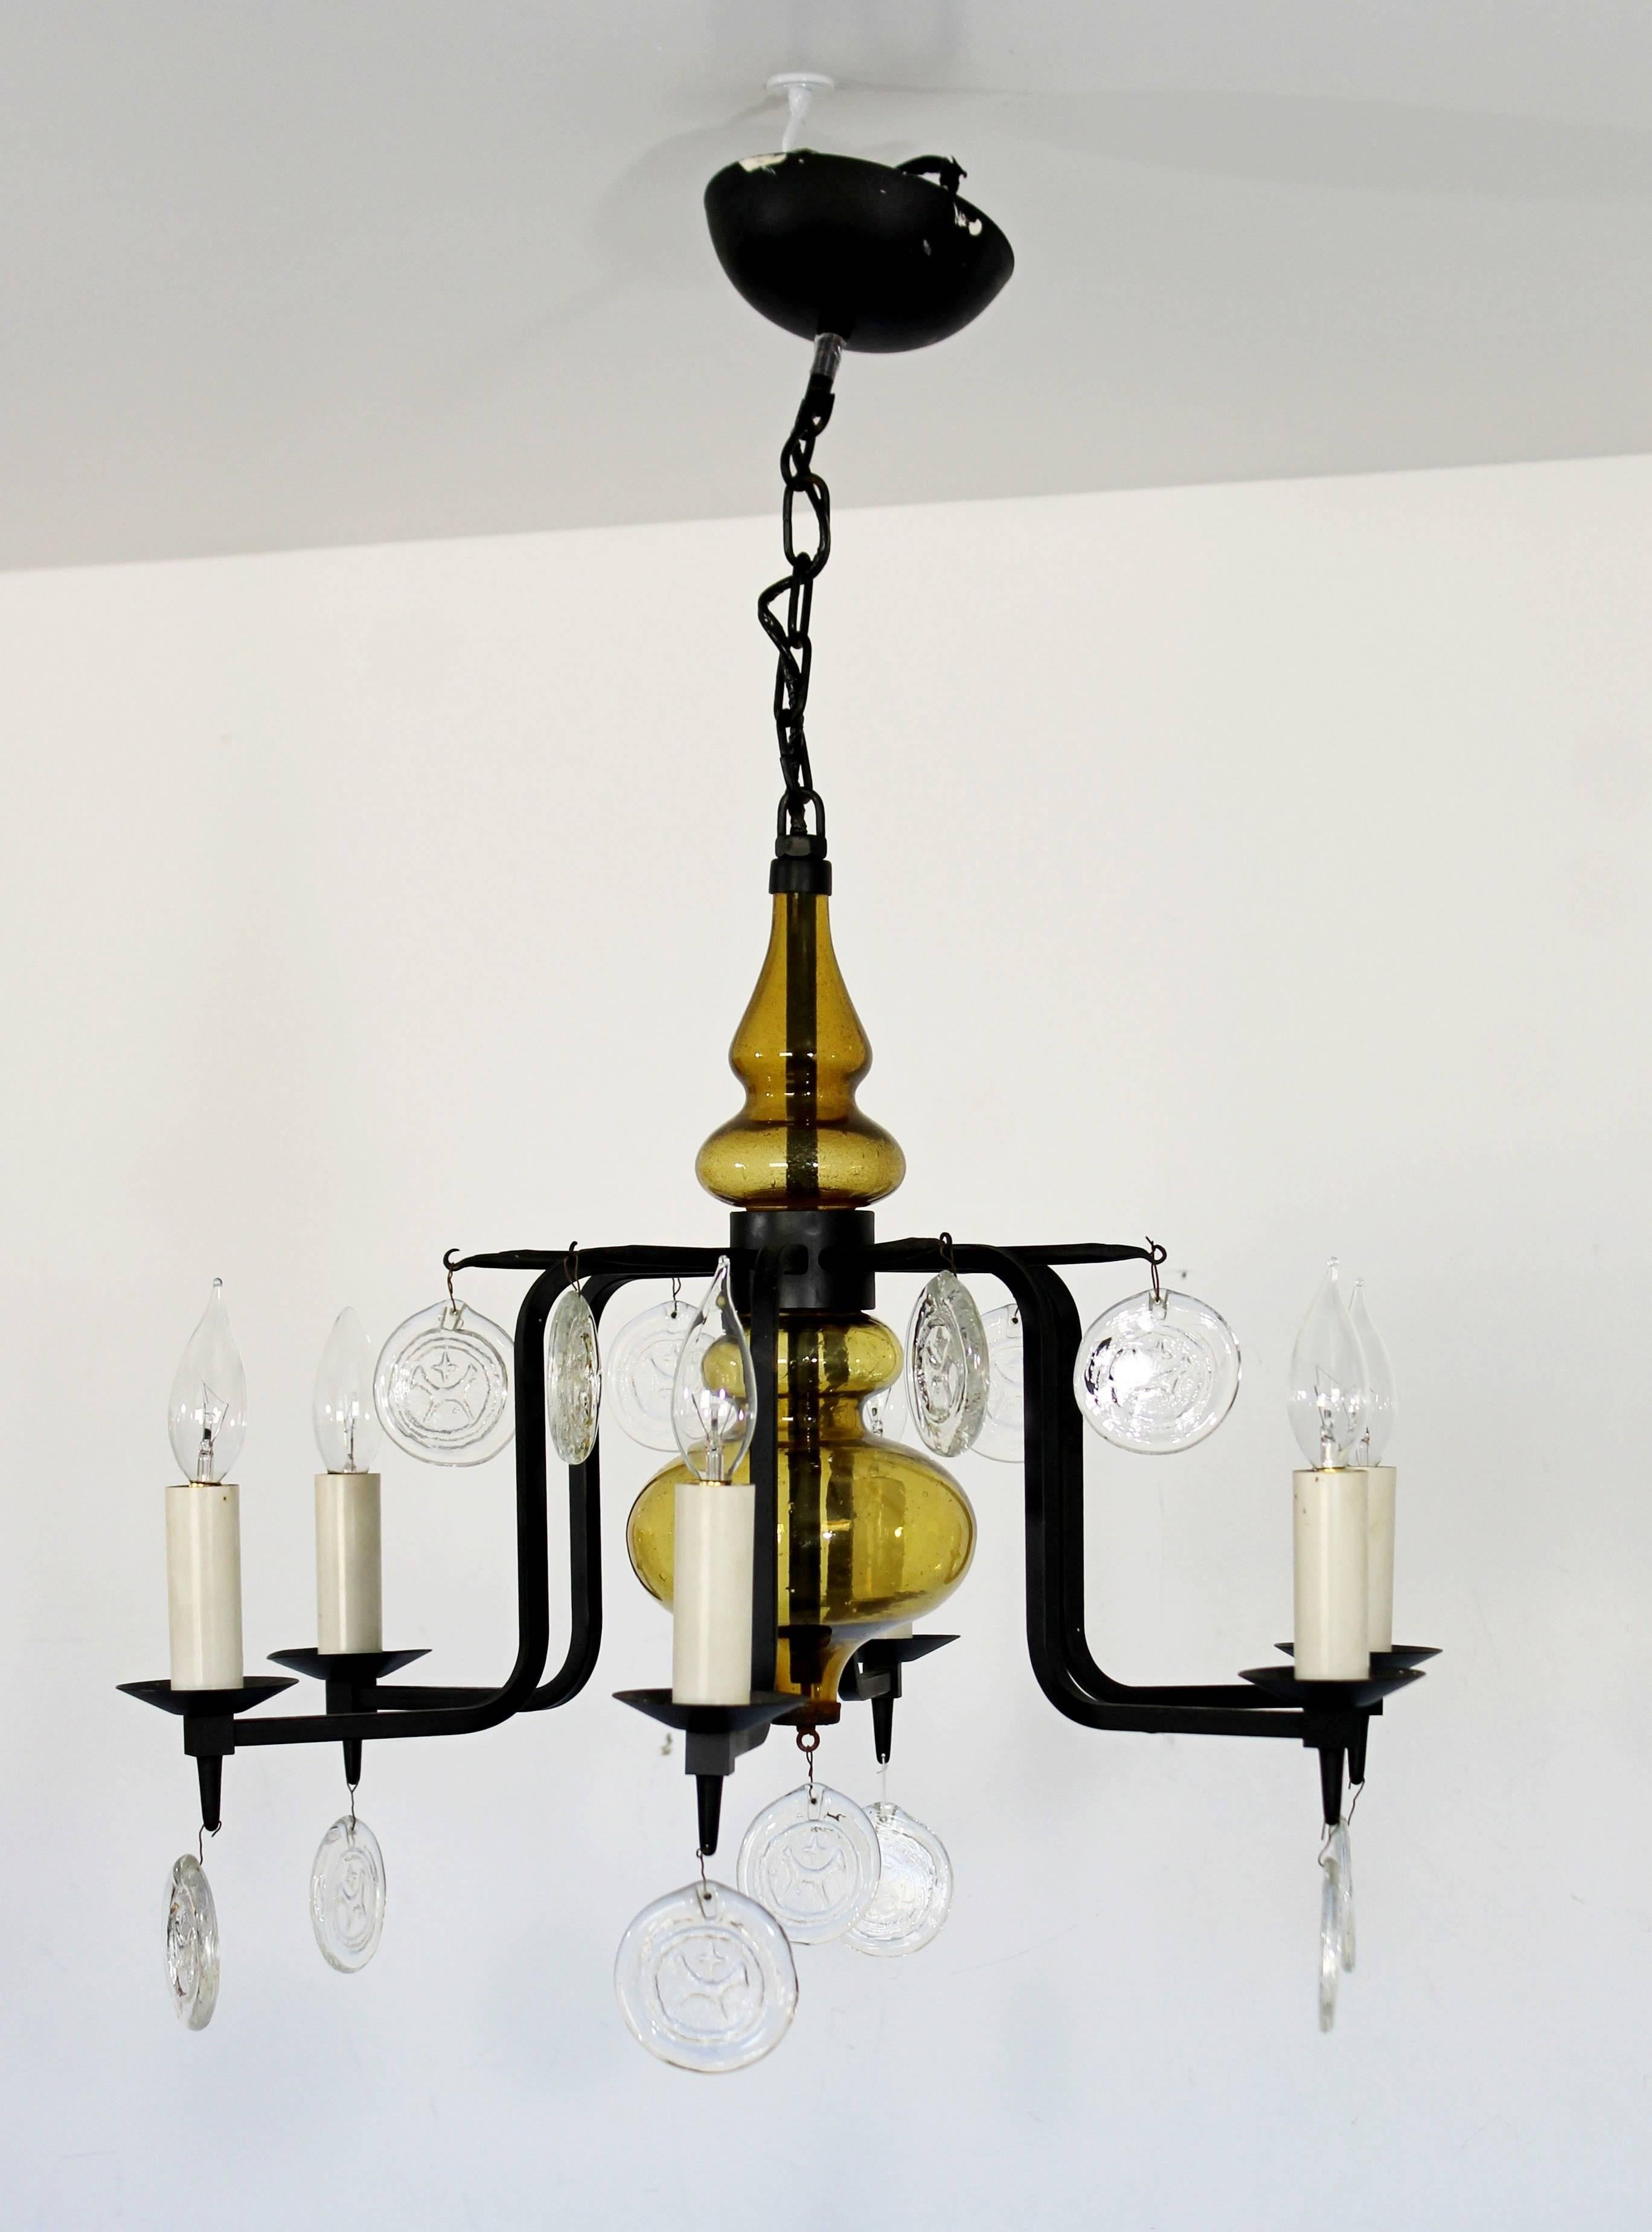 For your consideration is a dazzling, wrought iron chandelier, with yellow glass and clear glass, hanging medalions, by Svend Aage Holm Sorenson, circa the 1950s. In excellent condition. The dimensions are 22.5